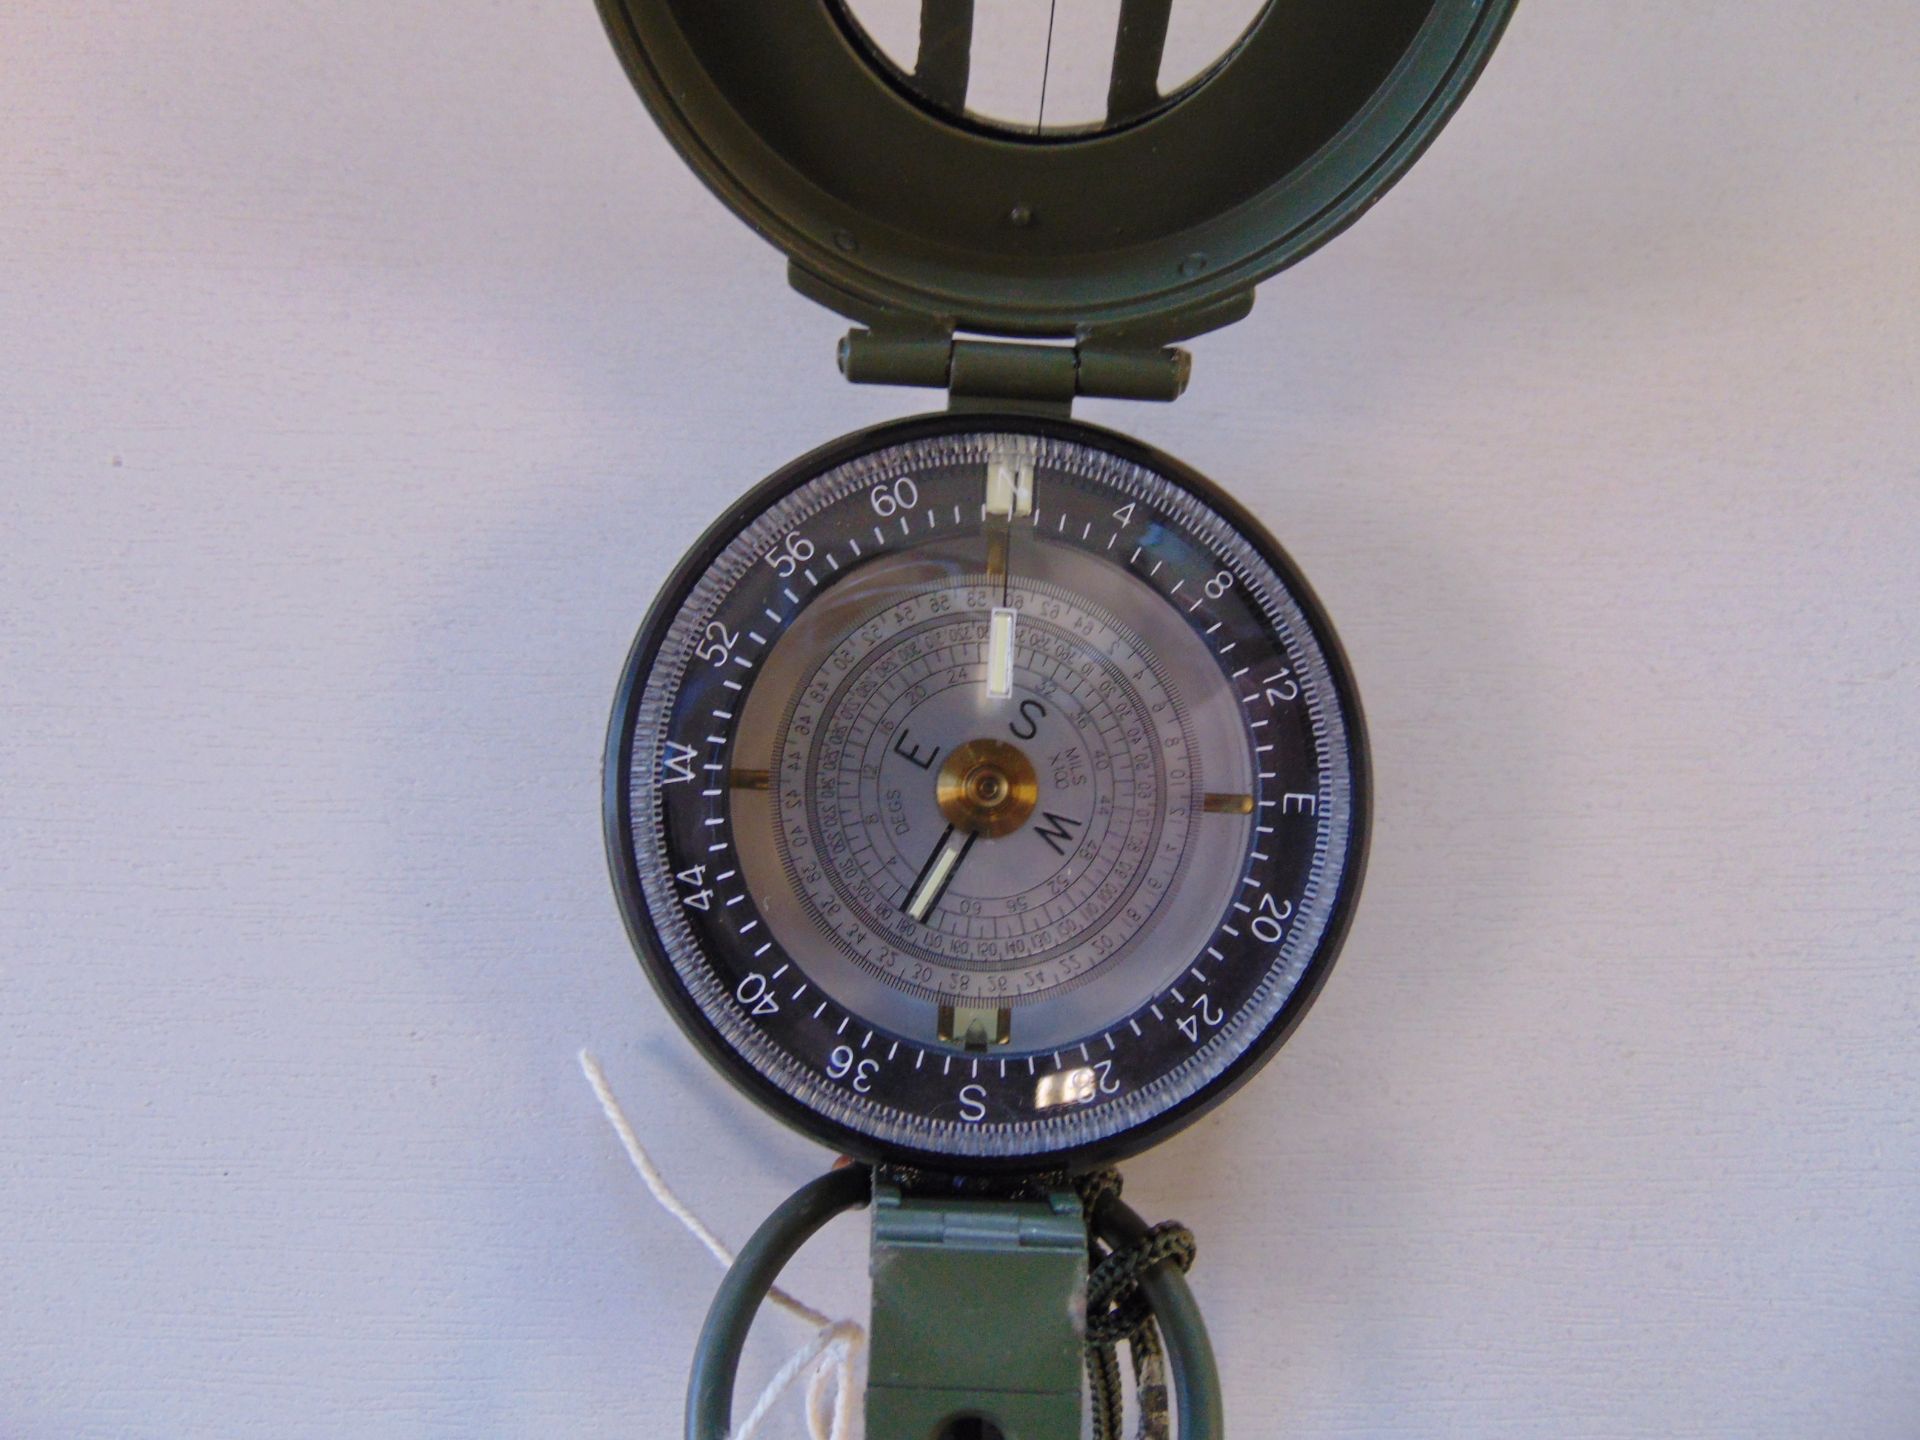 New Unissued Francis Barker M88 British Army Prismatic Compass - Image 3 of 4